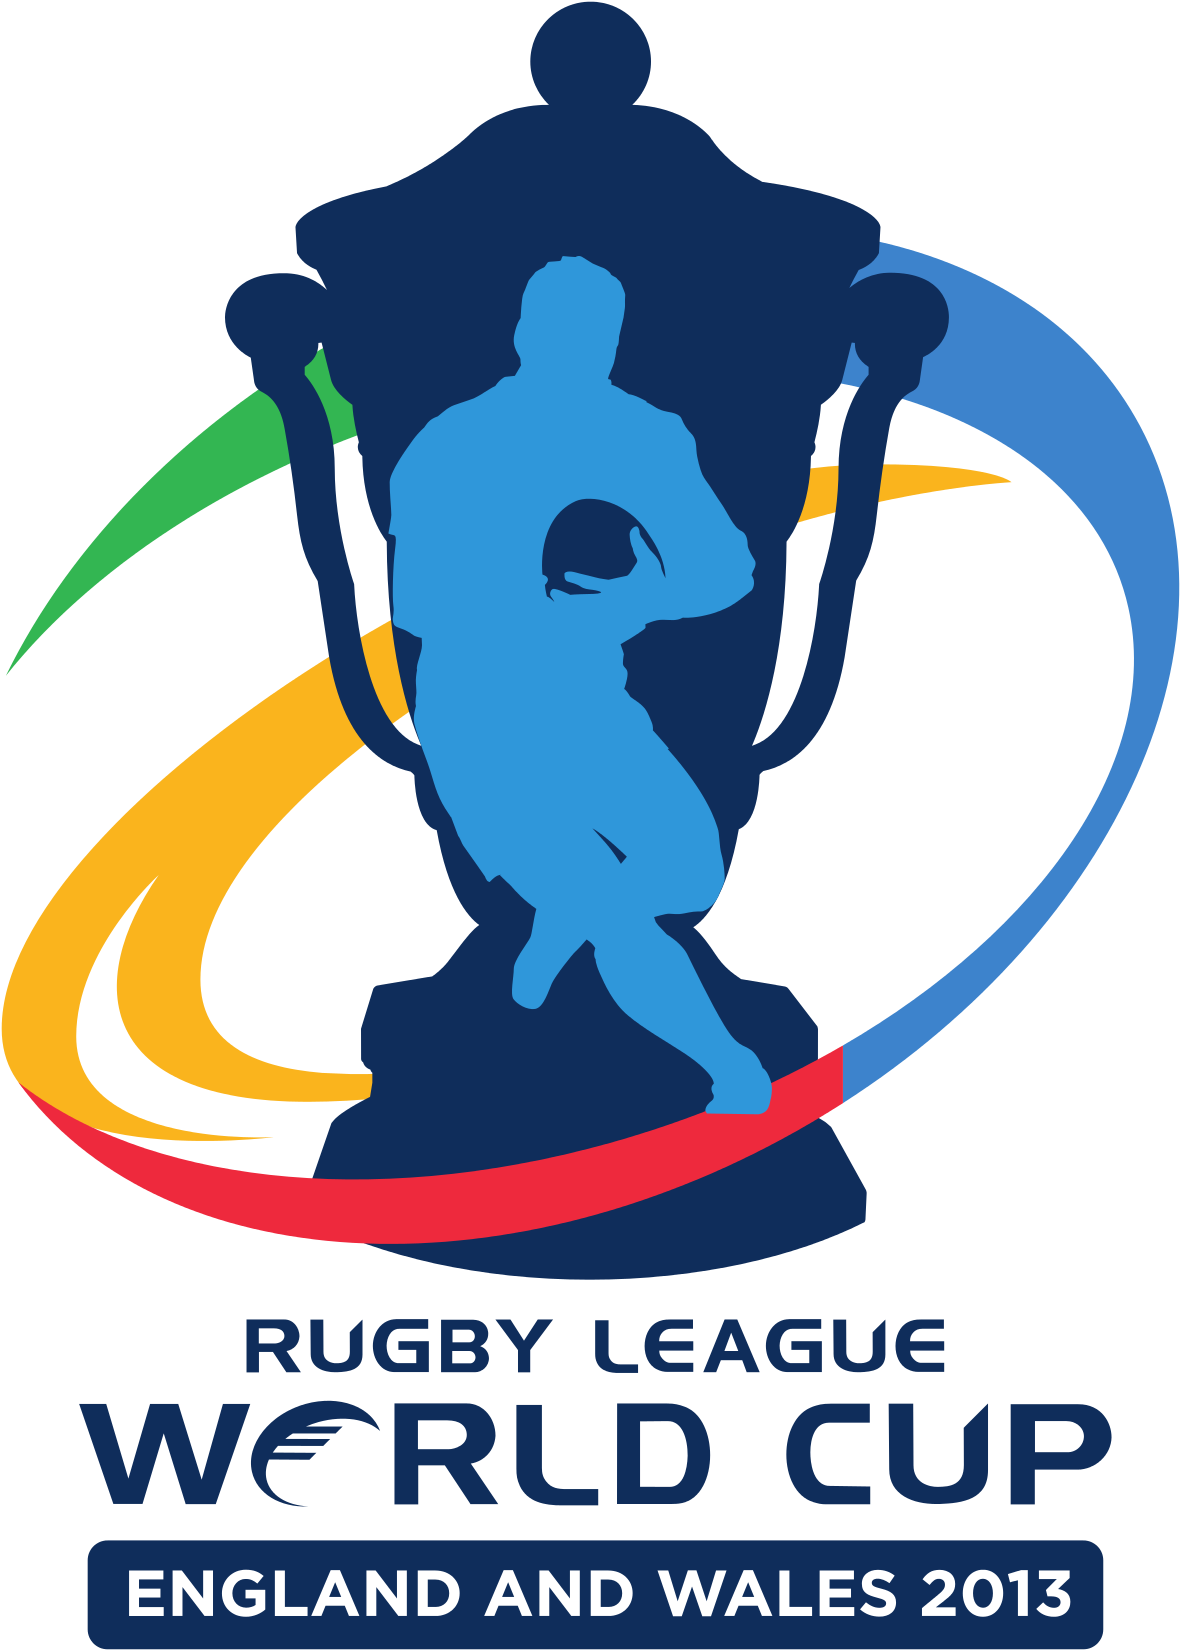 Superepus News - Rugby League World Cup 2013 (1200x1670)